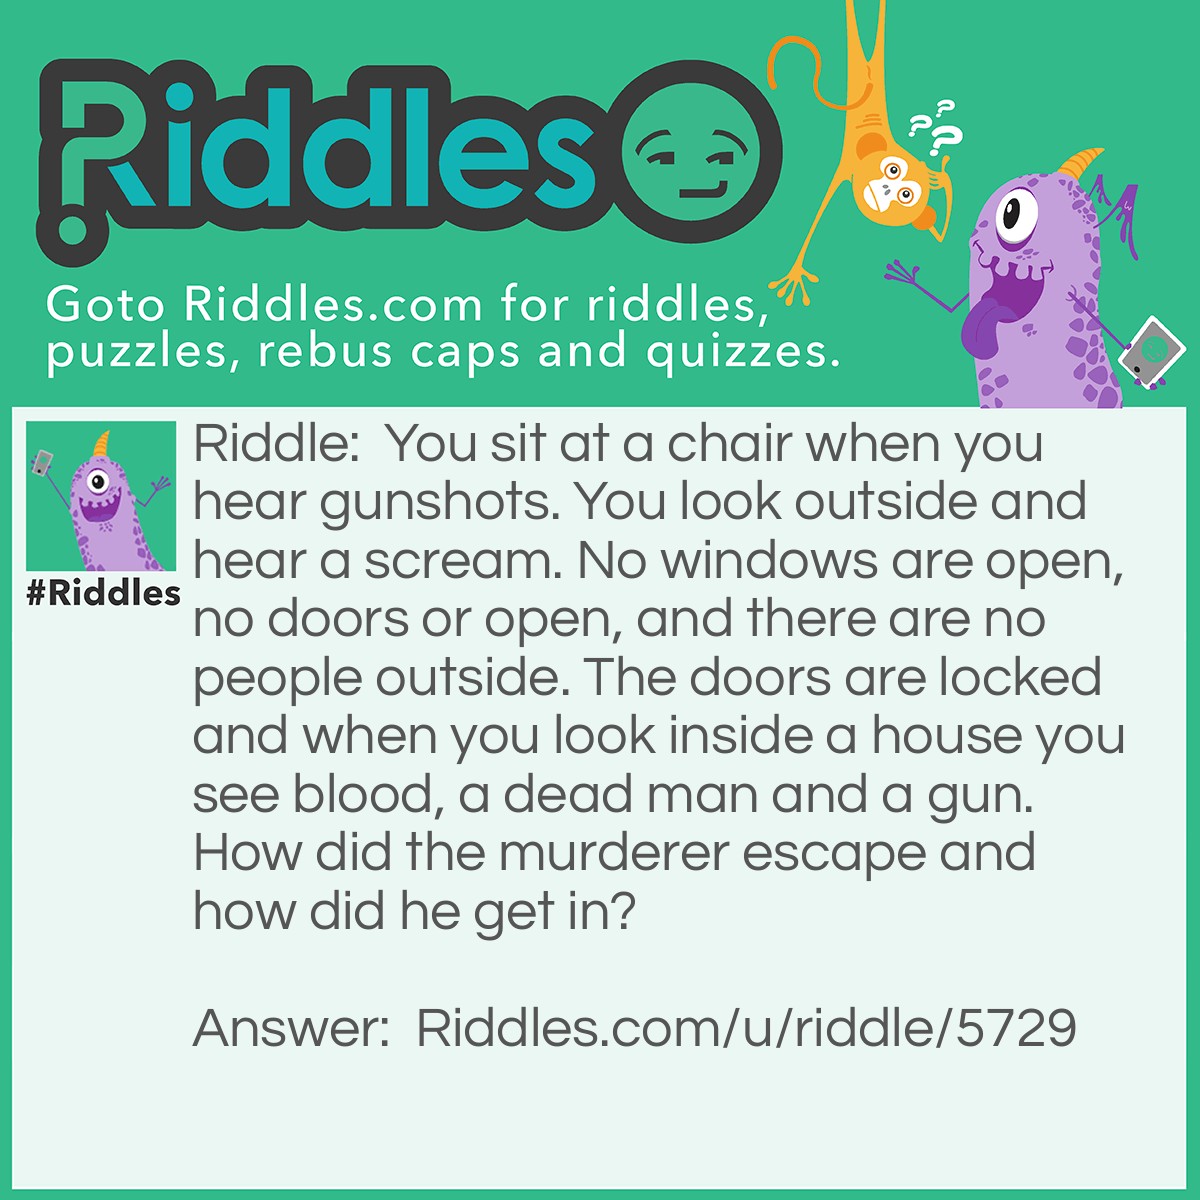 Riddle: You sit at a chair when you hear gunshots. You look outside and hear a scream. No windows are open, no doors or open, and there are no people outside. The doors are locked and when you look inside a house you see blood, a dead man and a gun. How did the murderer escape and how did he get in? Answer: It said the Windows and doors are locked. The riddle did not say anything about a broken window. You looked inside, but now did you know it was that house, because it had a broken window.